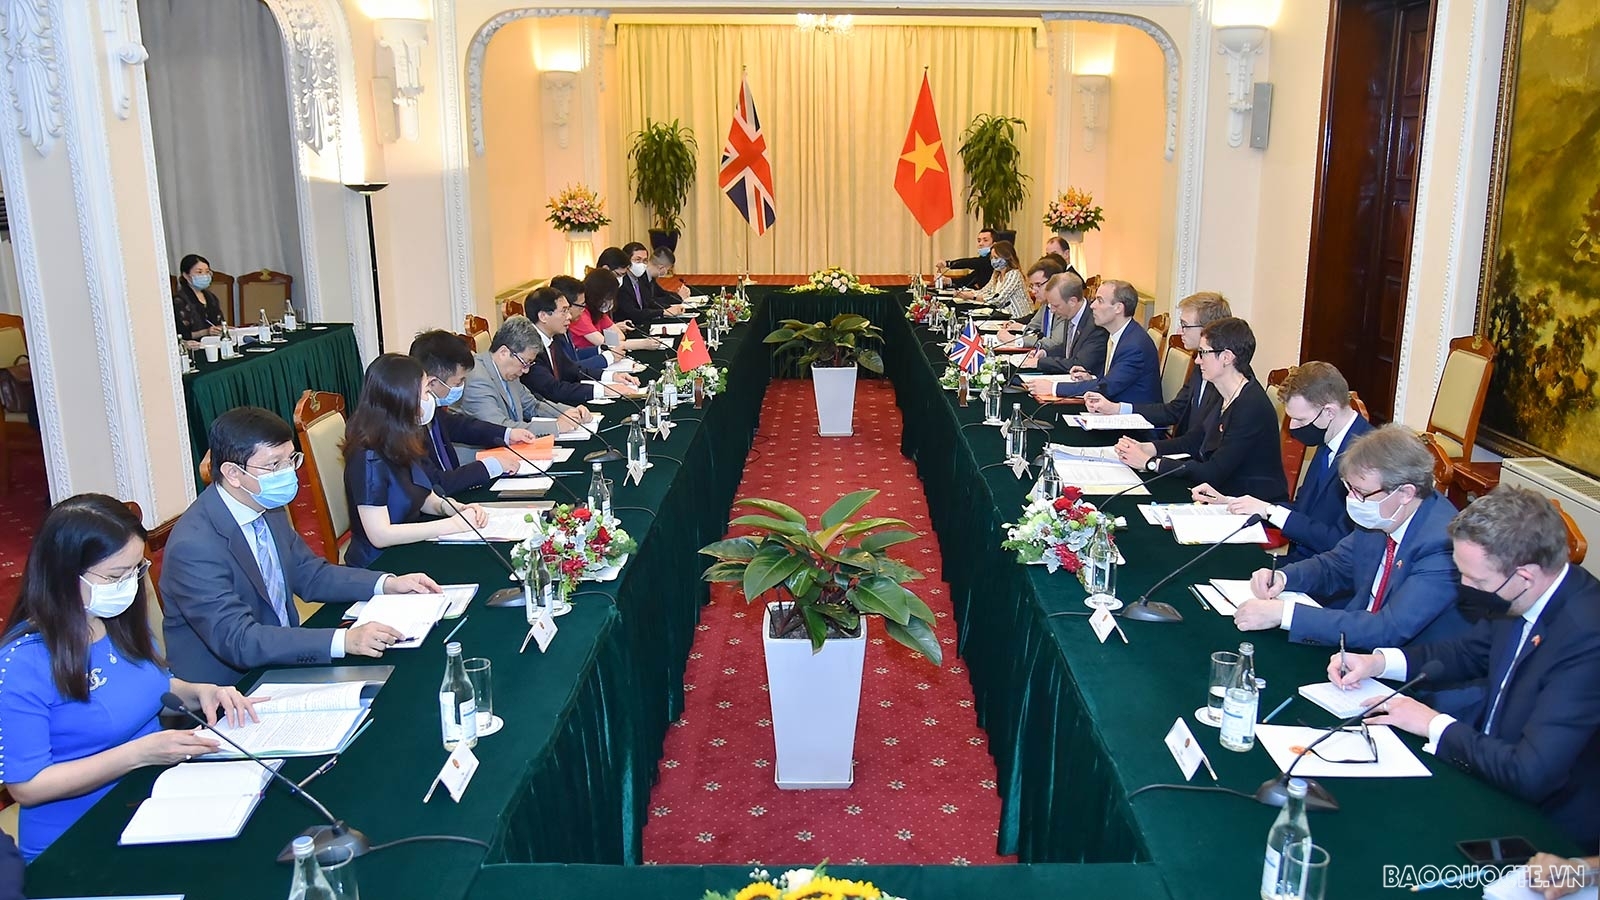 Uk Foreign Secretary visits Vietnam for the second time in nine months